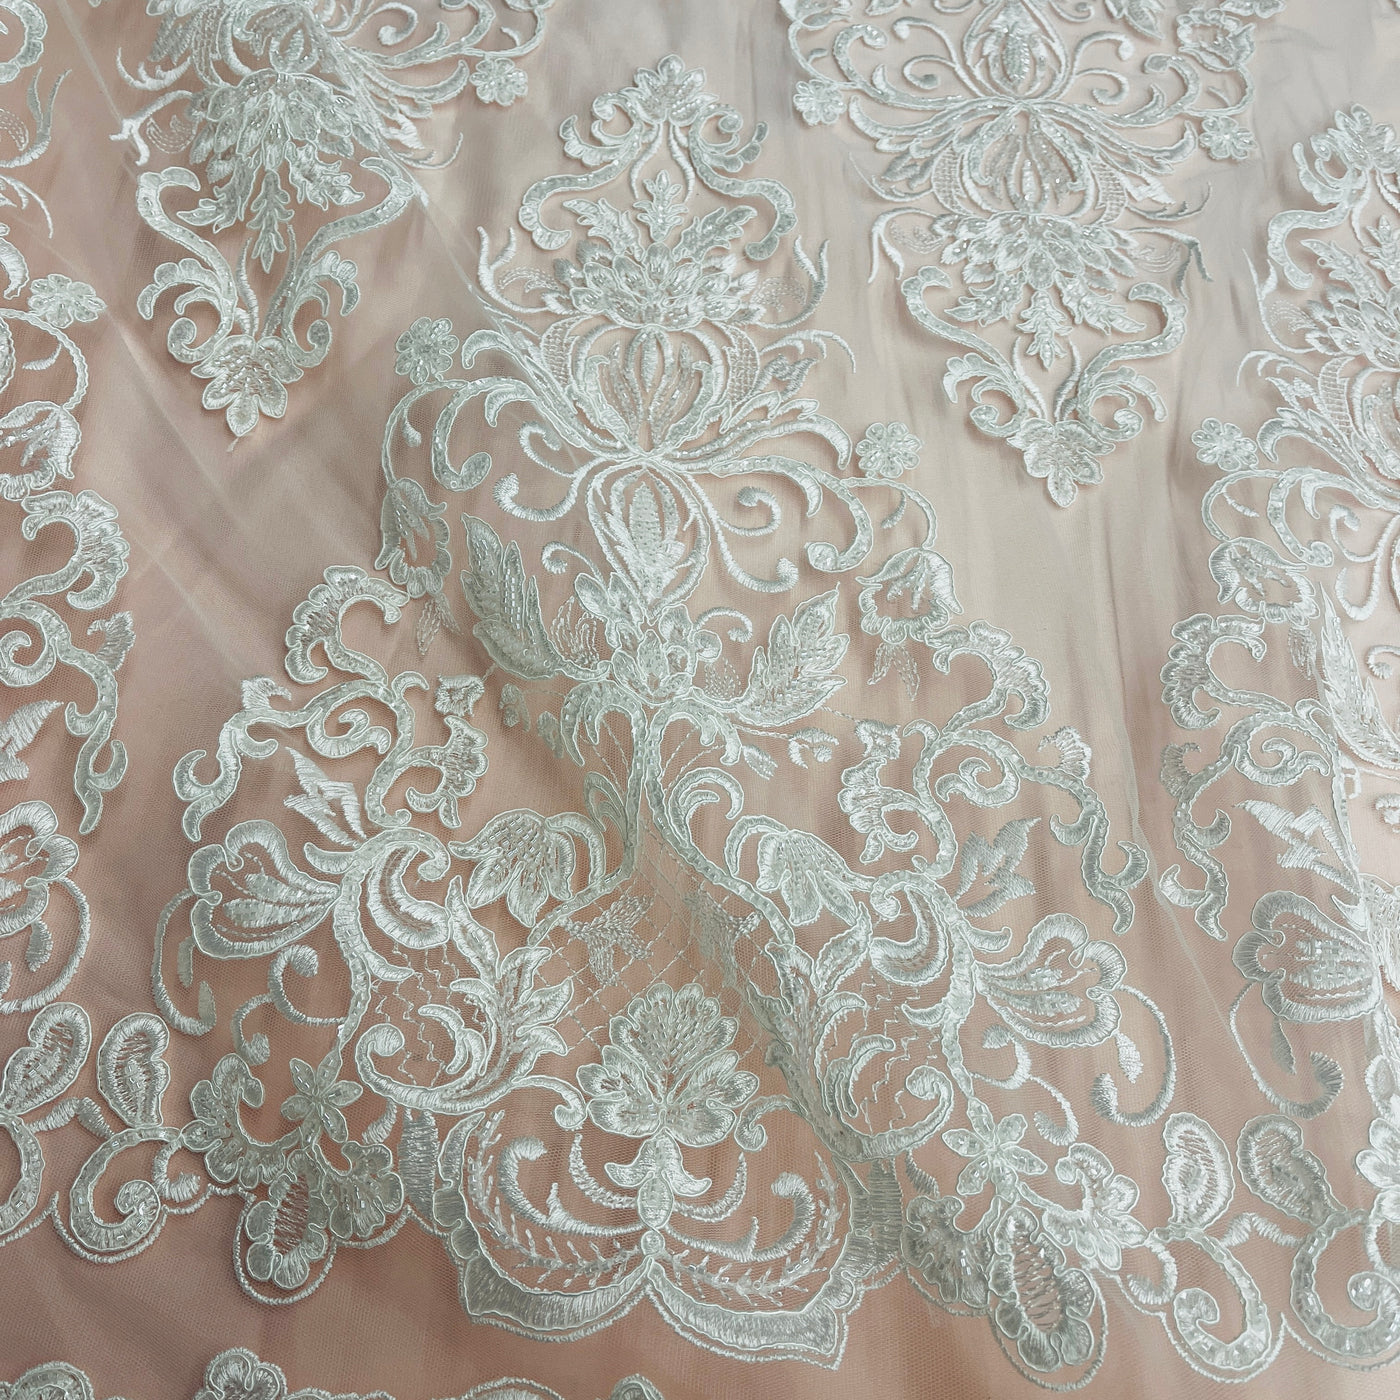 Beaded, Corded & Embroidered on 100% Polyester Mesh Net Lace Fabric. Lace USA